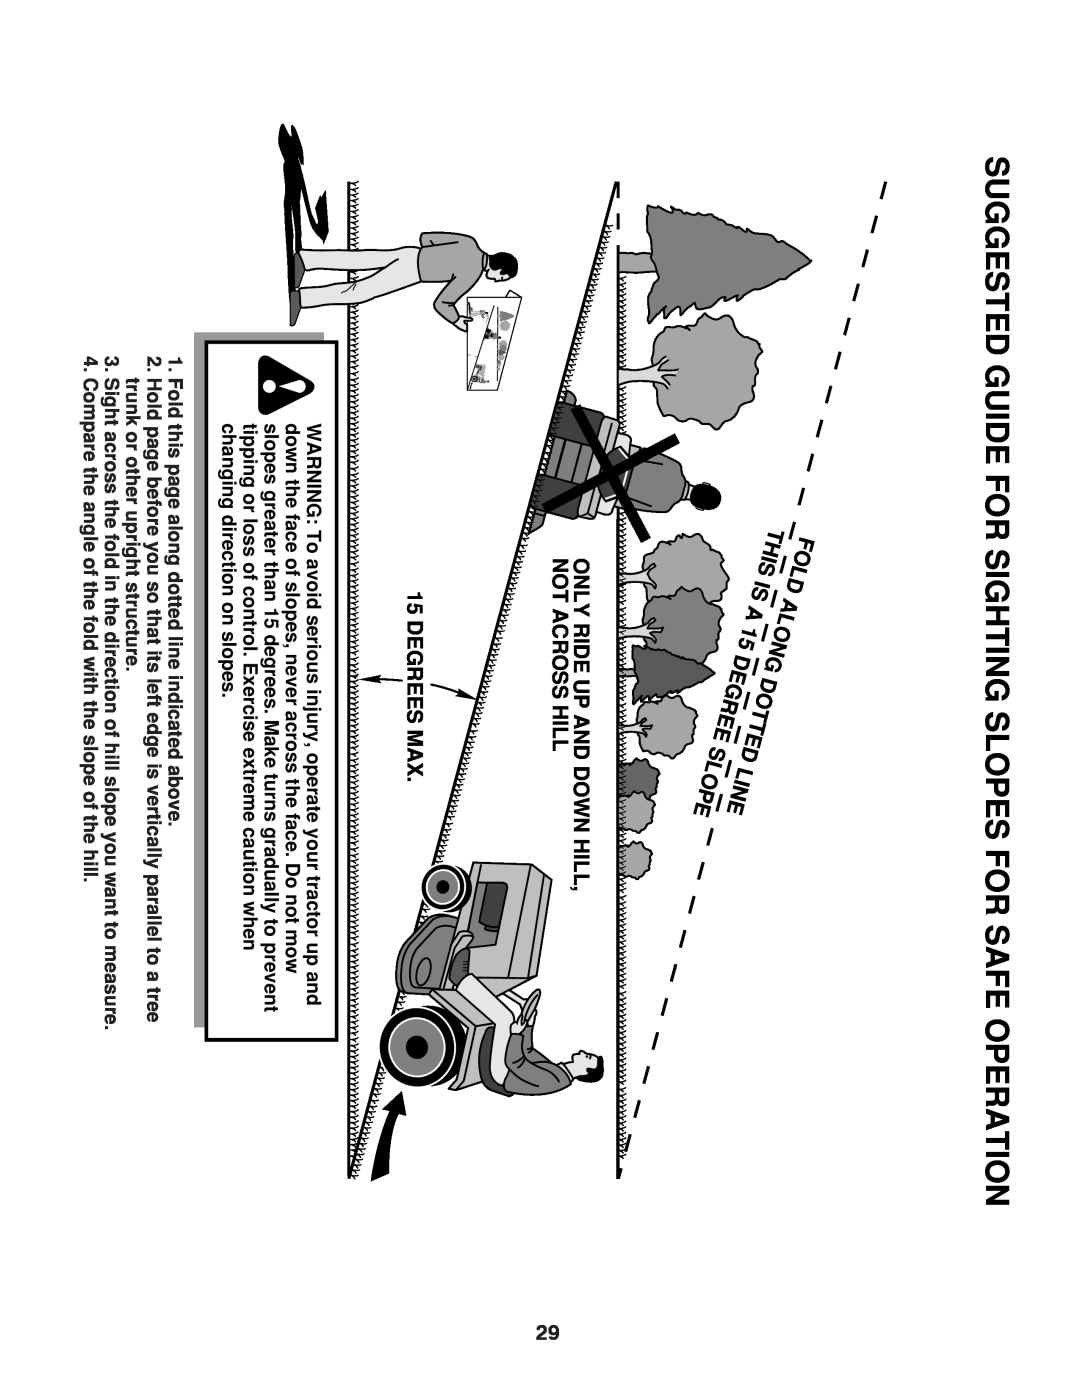 Poulan 96012006904 manual Suggested Guide For Sighting Slopes For Safe Operation 